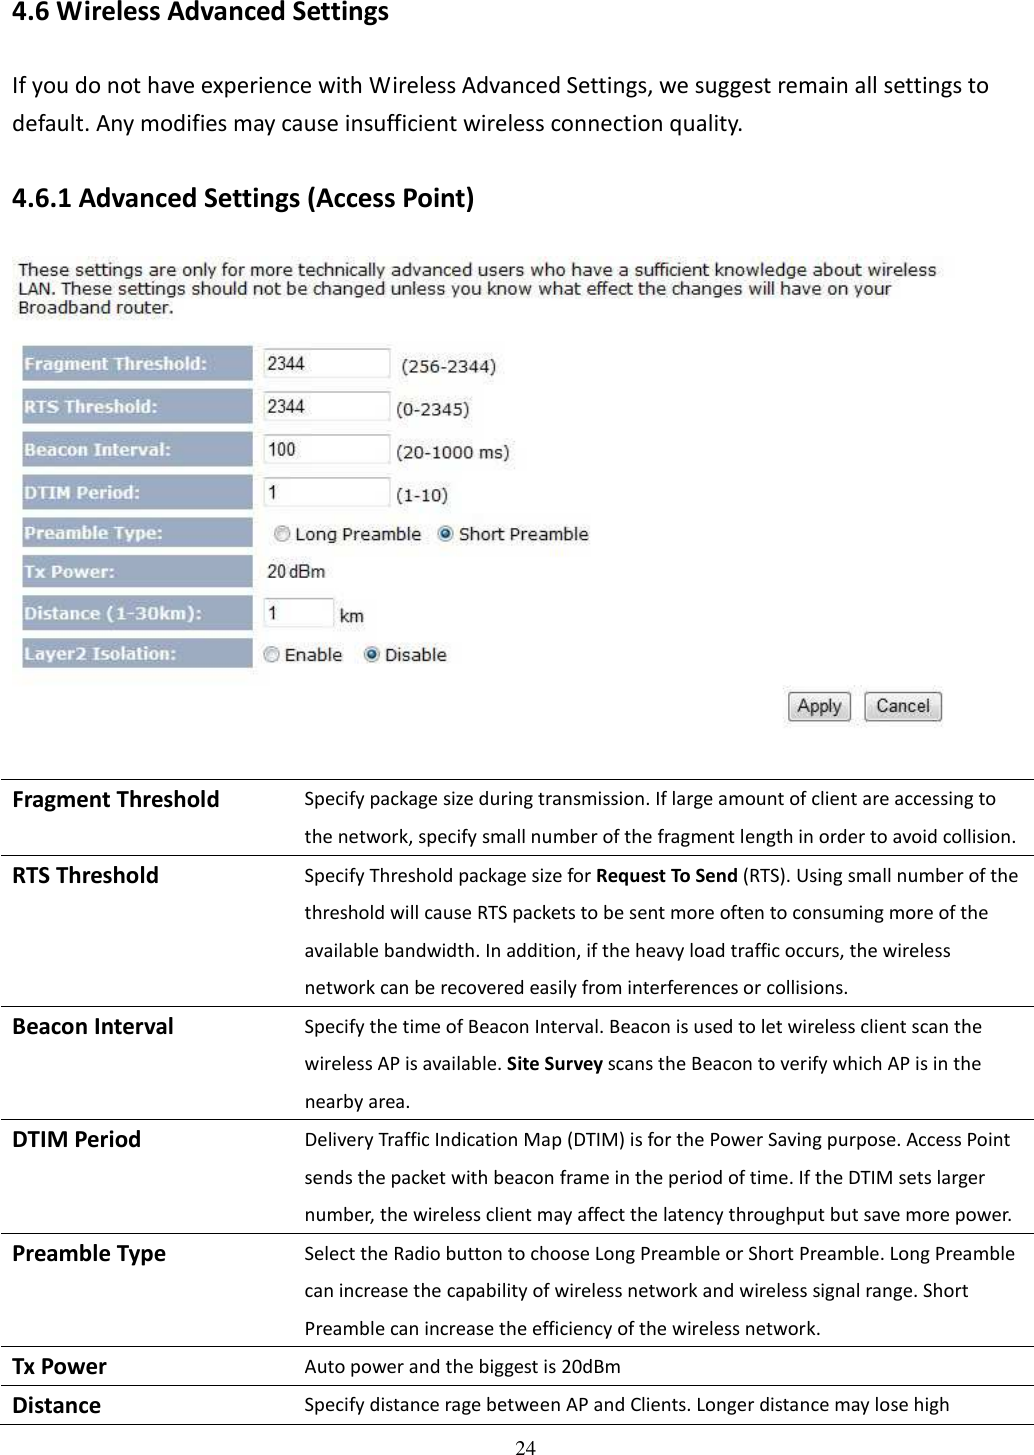 24  4.6 Wireless Advanced Settings If you do not have experience with Wireless Advanced Settings, we suggest remain all settings to default. Any modifies may cause insufficient wireless connection quality. 4.6.1 Advanced Settings (Access Point)   Fragment Threshold Specify package size during transmission. If large amount of client are accessing to the network, specify small number of the fragment length in order to avoid collision. RTS Threshold Specify Threshold package size for Request To Send (RTS). Using small number of the threshold will cause RTS packets to be sent more often to consuming more of the available bandwidth. In addition, if the heavy load traffic occurs, the wireless network can be recovered easily from interferences or collisions. Beacon Interval Specify the time of Beacon Interval. Beacon is used to let wireless client scan the wireless AP is available. Site Survey scans the Beacon to verify which AP is in the nearby area. DTIM Period Delivery Traffic Indication Map (DTIM) is for the Power Saving purpose. Access Point sends the packet with beacon frame in the period of time. If the DTIM sets larger number, the wireless client may affect the latency throughput but save more power. Preamble Type Select the Radio button to choose Long Preamble or Short Preamble. Long Preamble can increase the capability of wireless network and wireless signal range. Short Preamble can increase the efficiency of the wireless network. Tx Power Auto power and the biggest is 20dBm Distance Specify distance rage between AP and Clients. Longer distance may lose high 